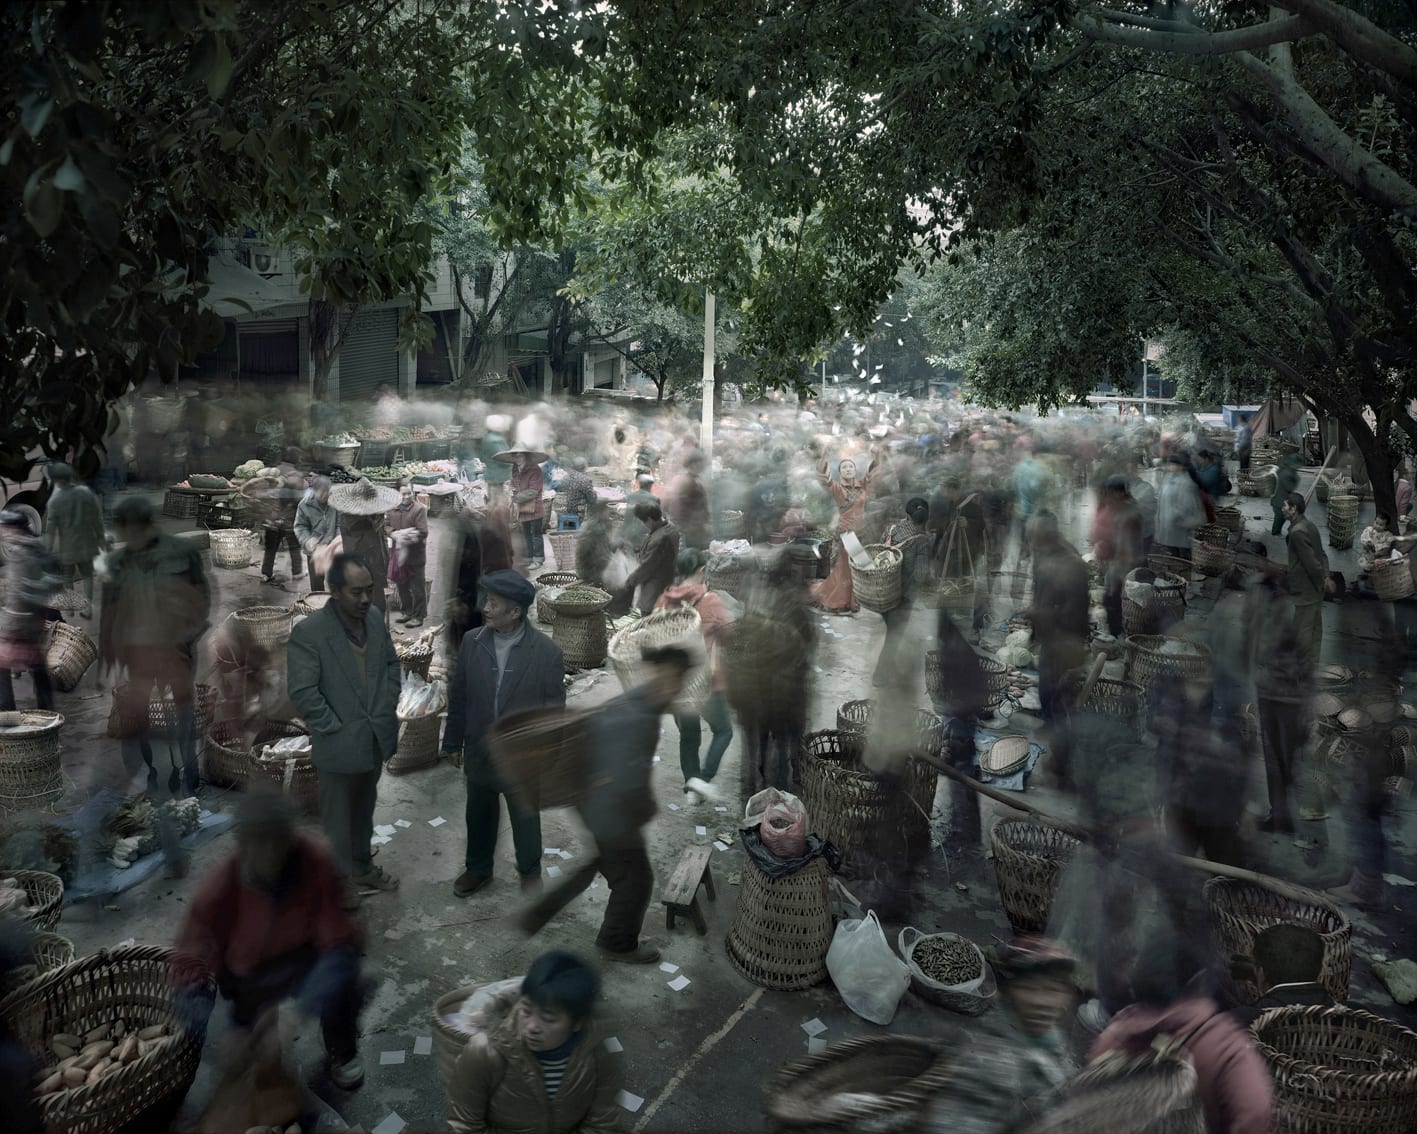 Qin Wen 秦文, Old City - Wanzhuxiang 故城系列之萬竹鄉, 2012